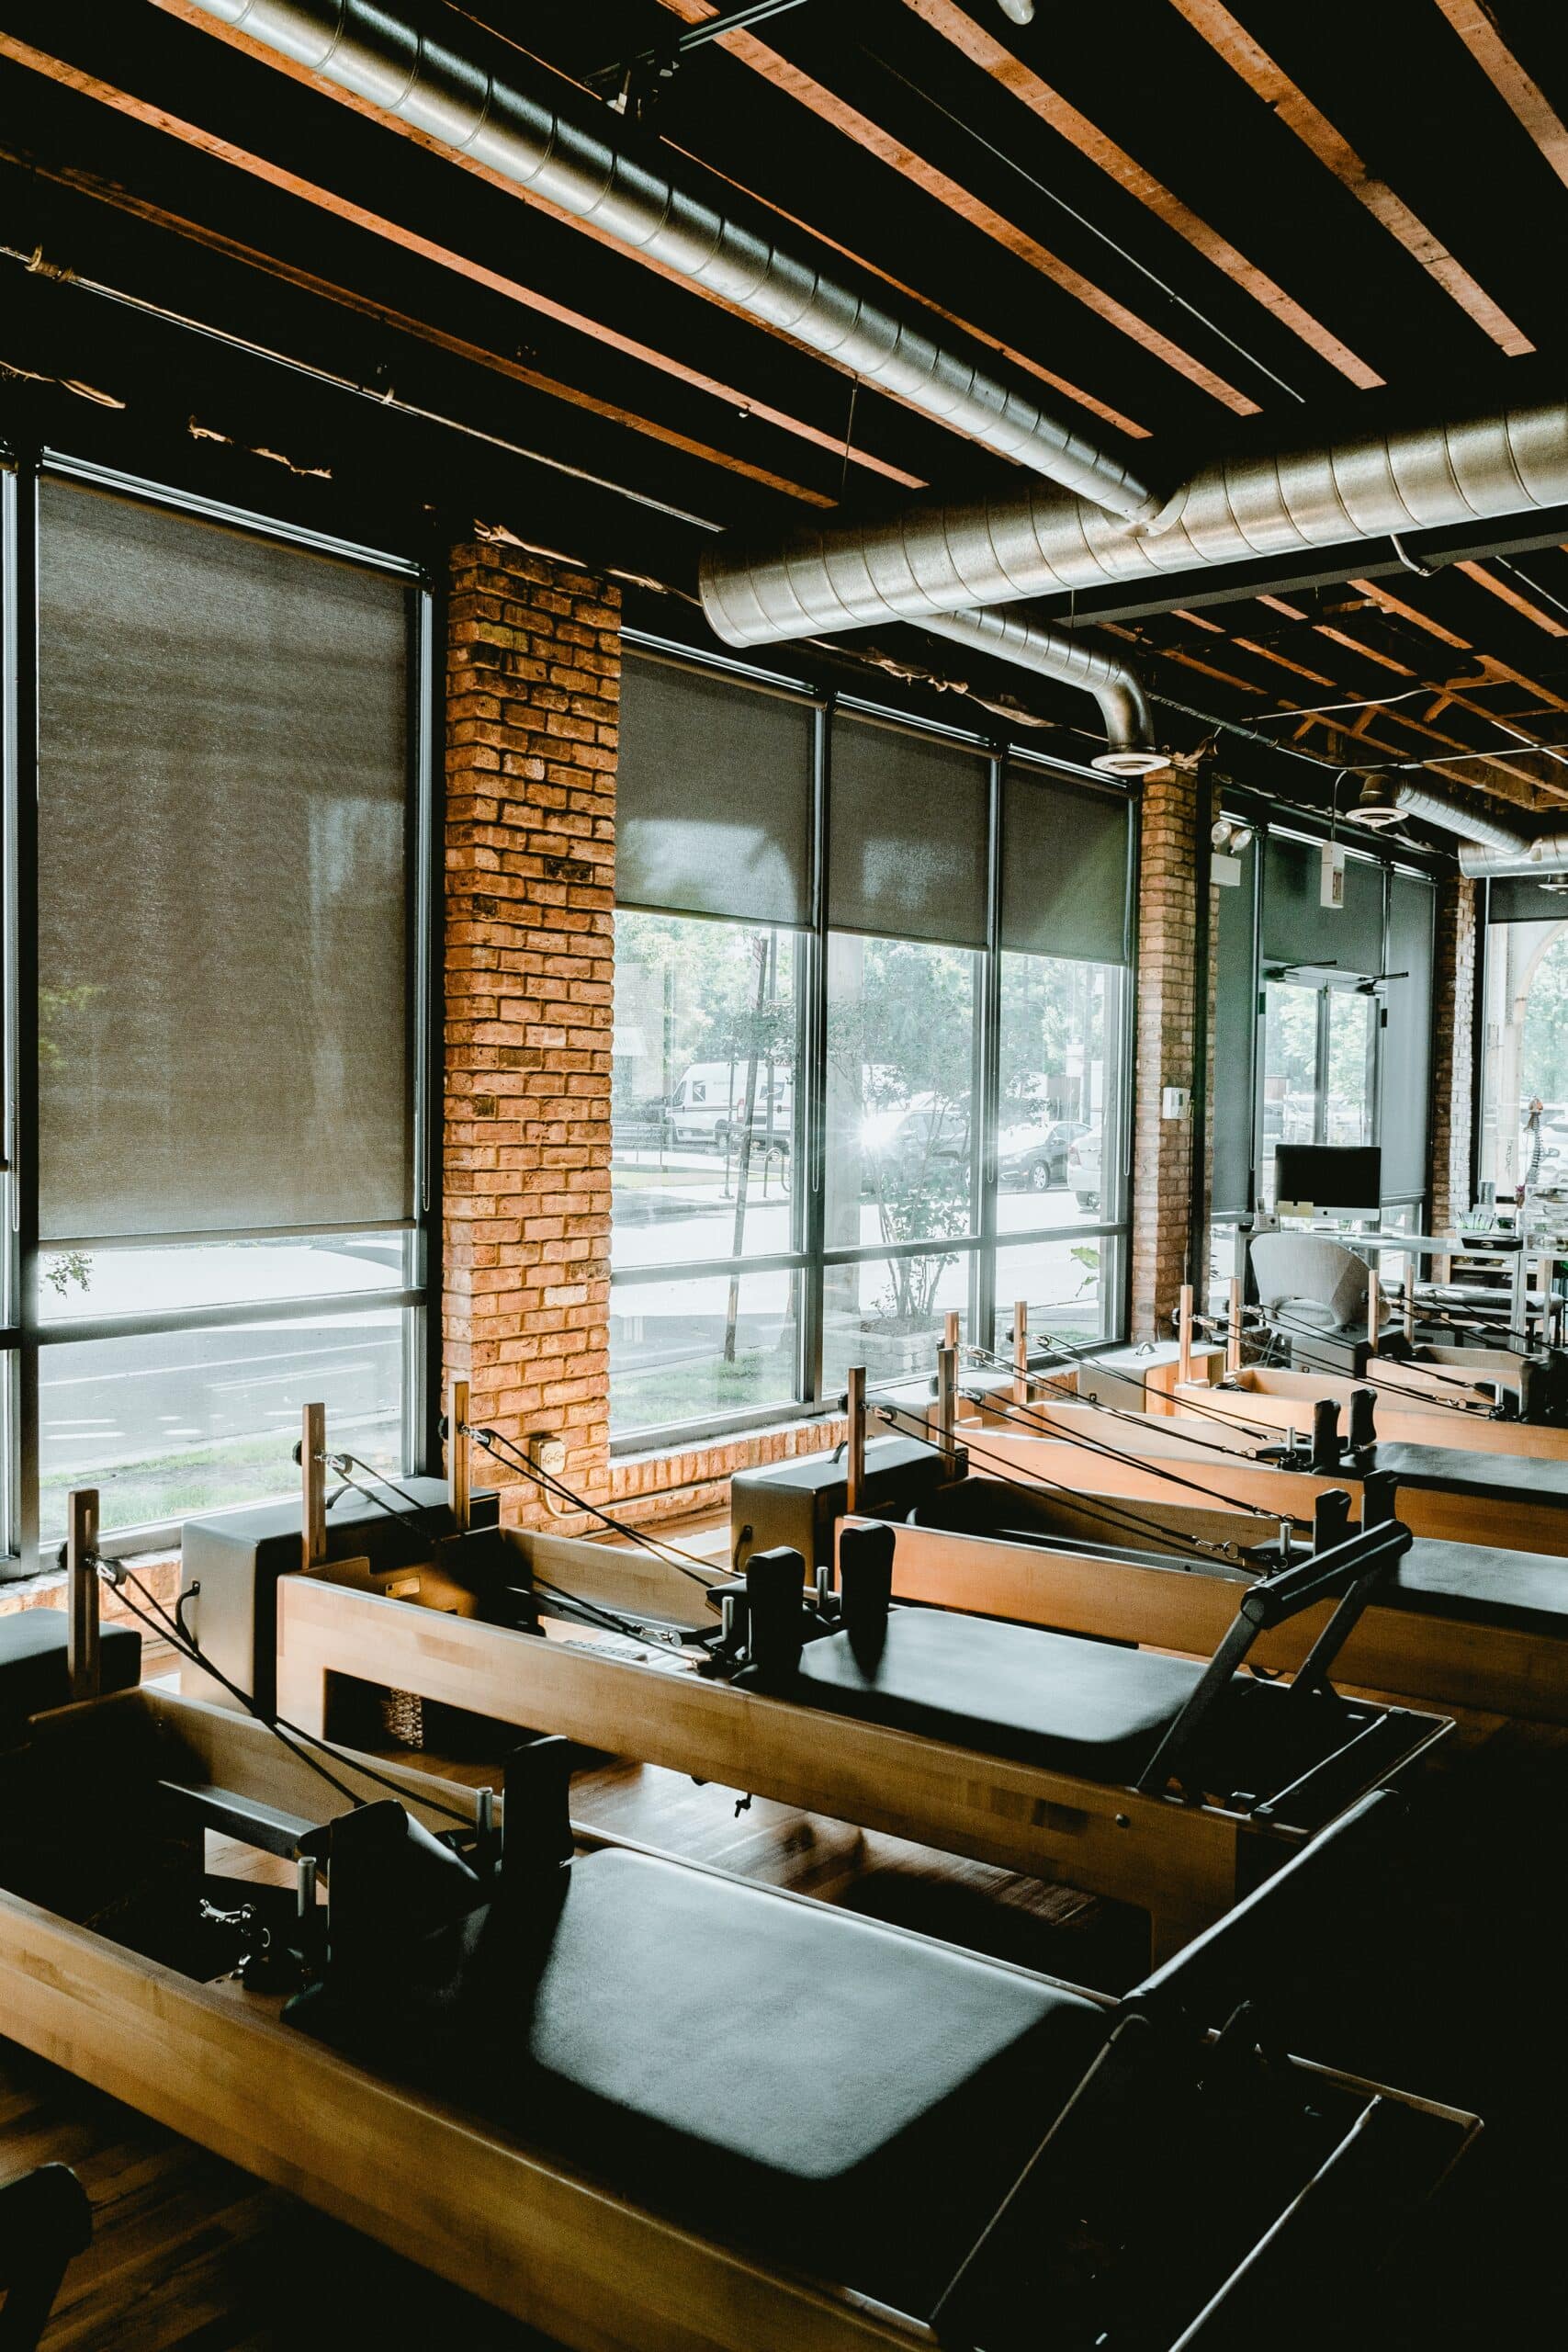 This post is about the top 5 fitness classes in Vancouver.